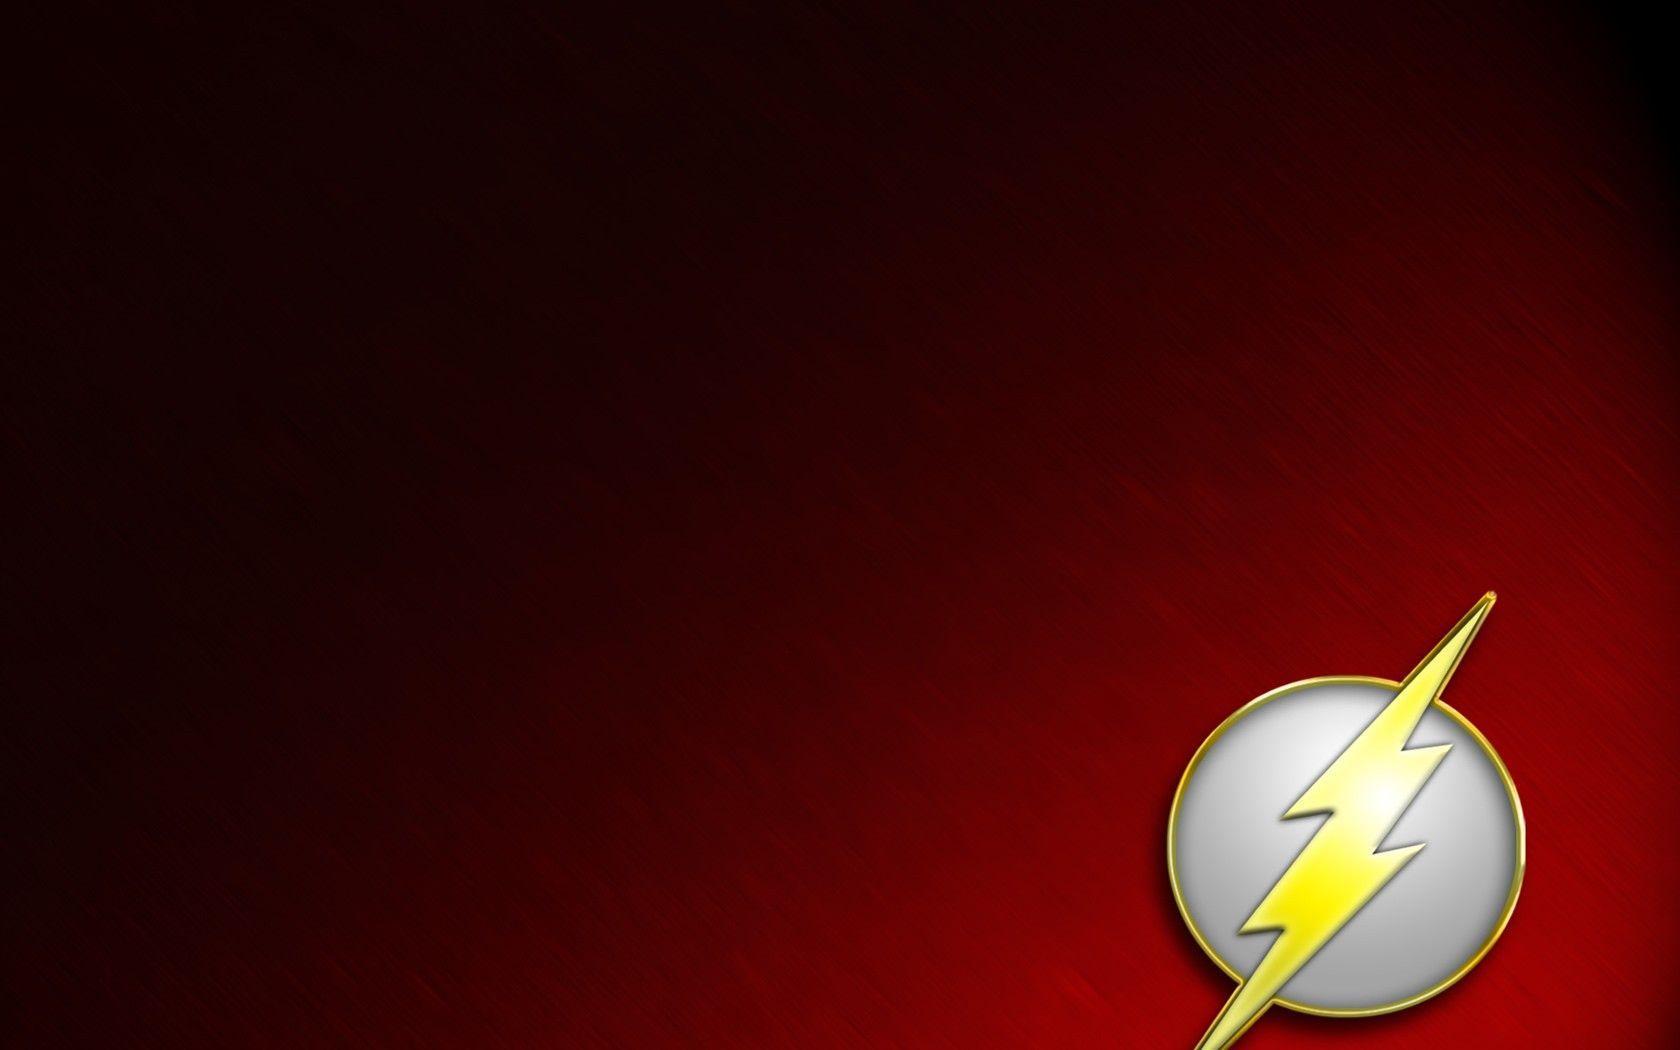 HD Wallpaper of The Flash